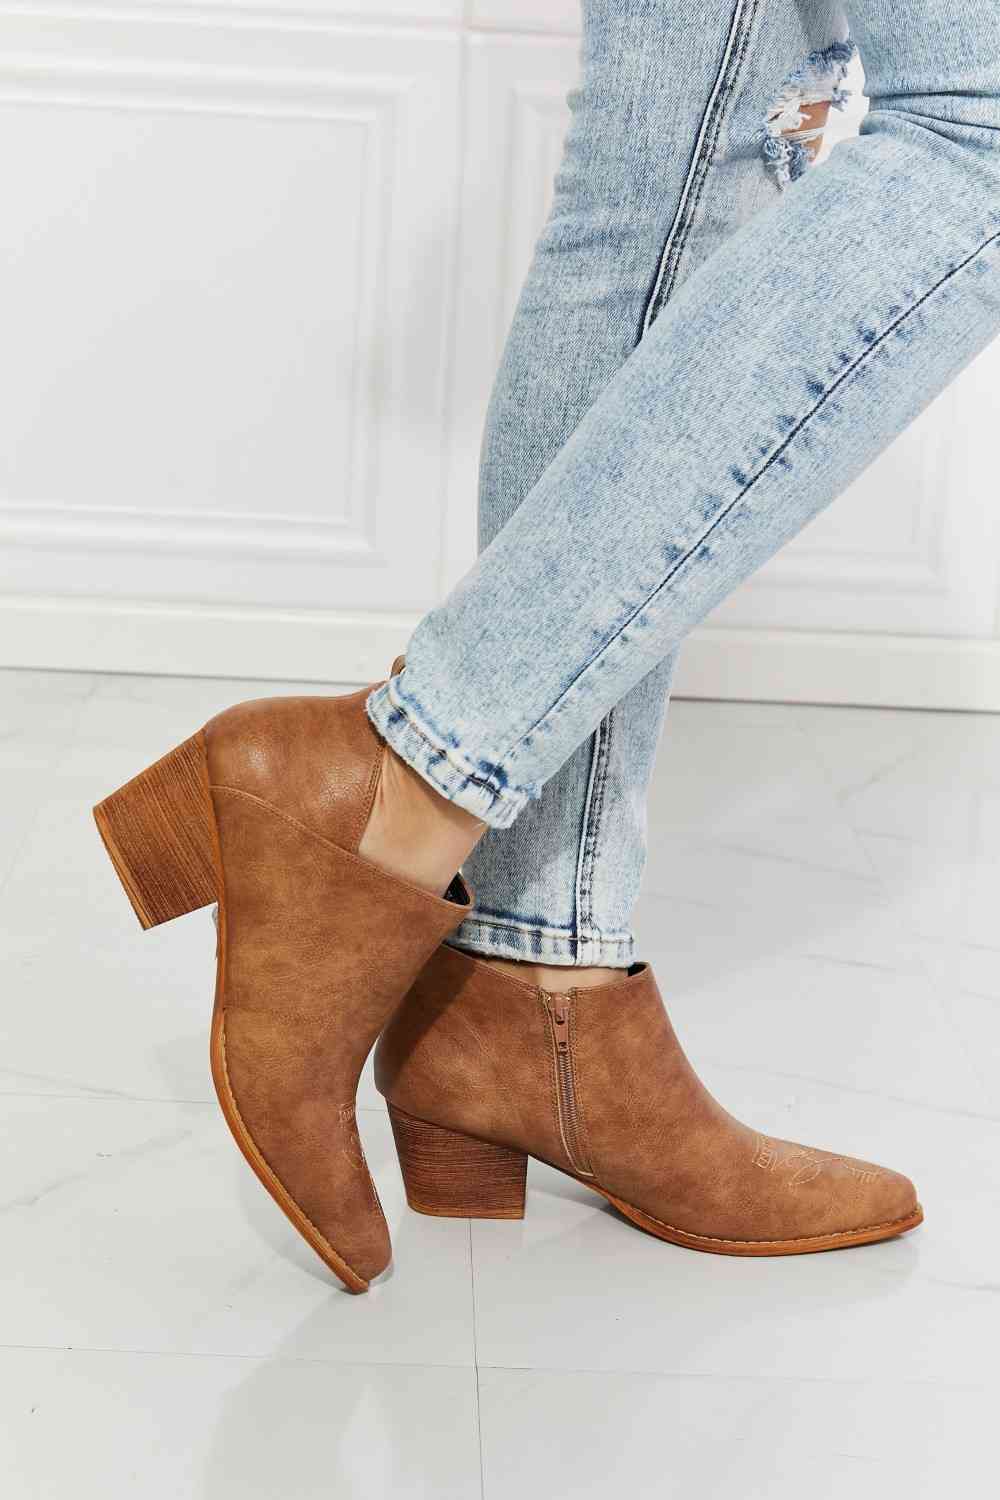 Trust Yourself Embroidered Crossover Cowboy Bootie in Caramel - Caramel / 6 - All Products - Shoes - 1 - 2024